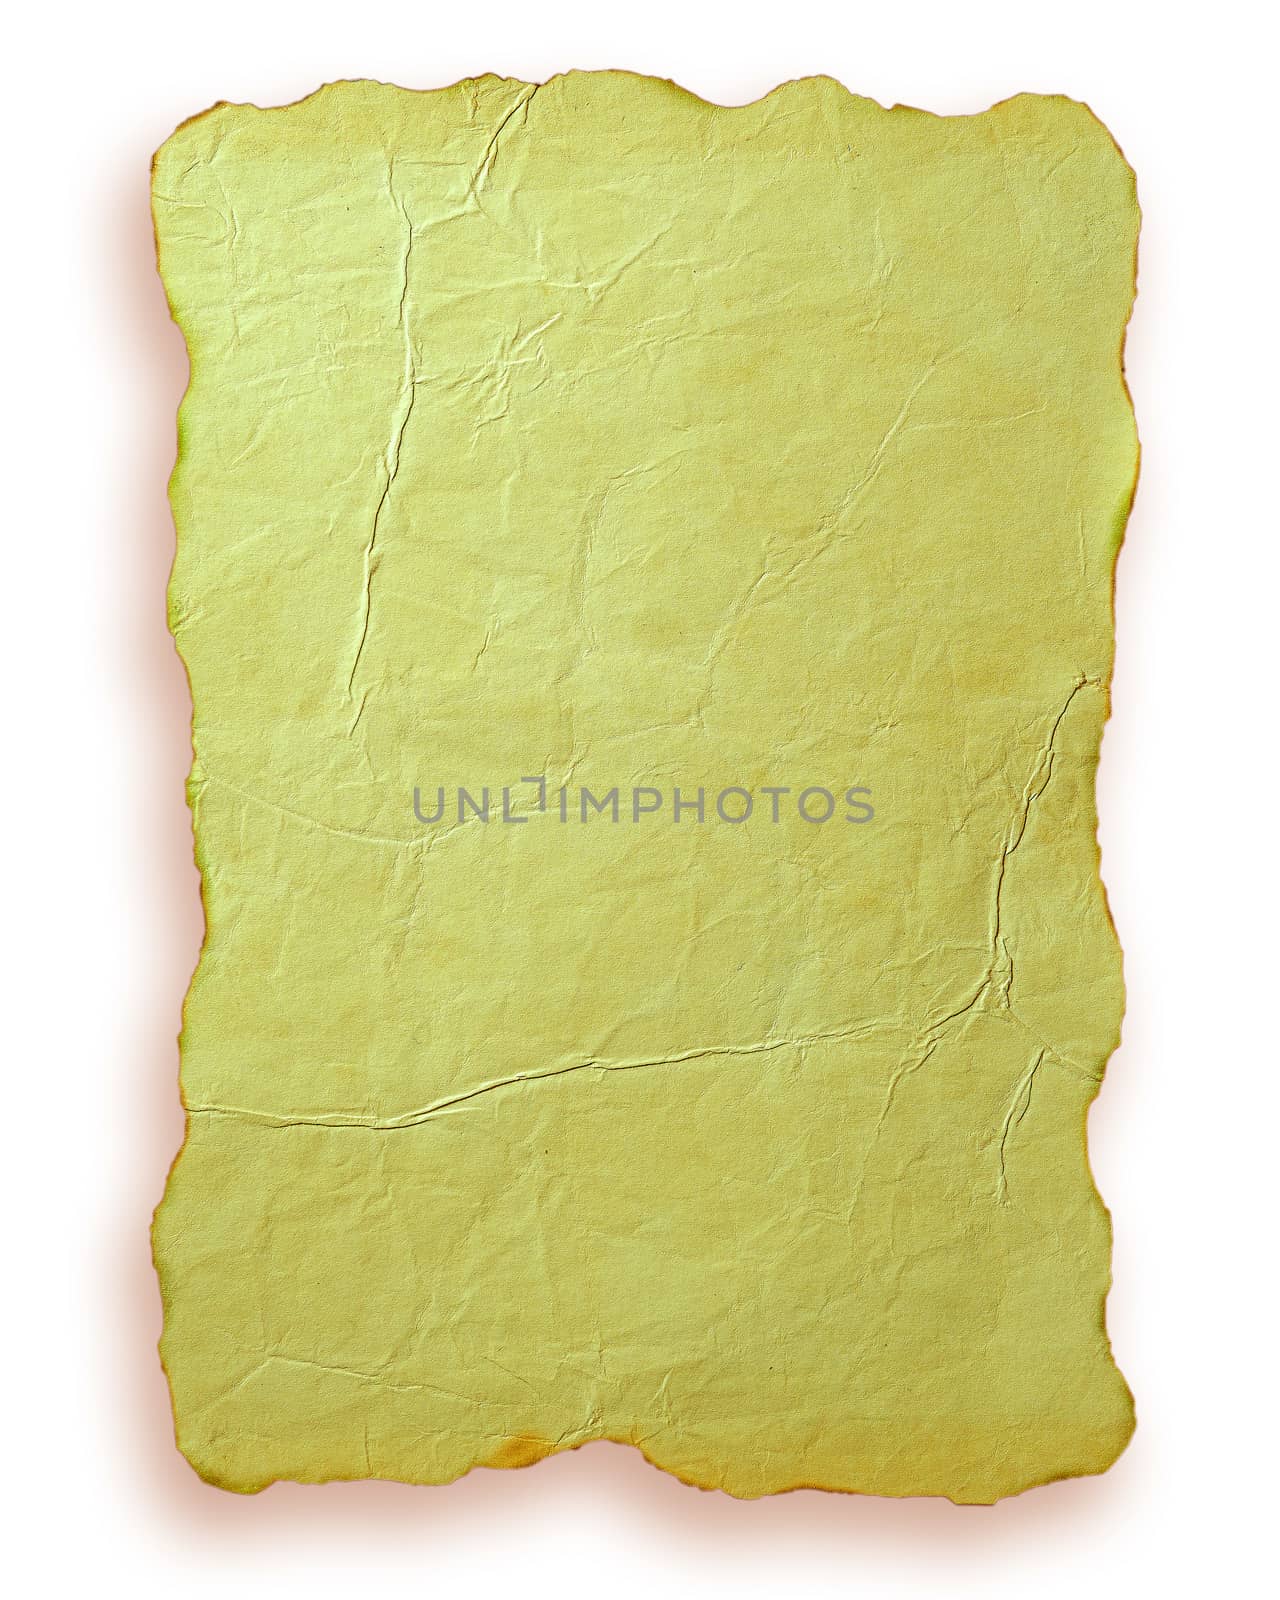 Vintage old paper and burn marks around the edge. Isolate on white background with clipping path.